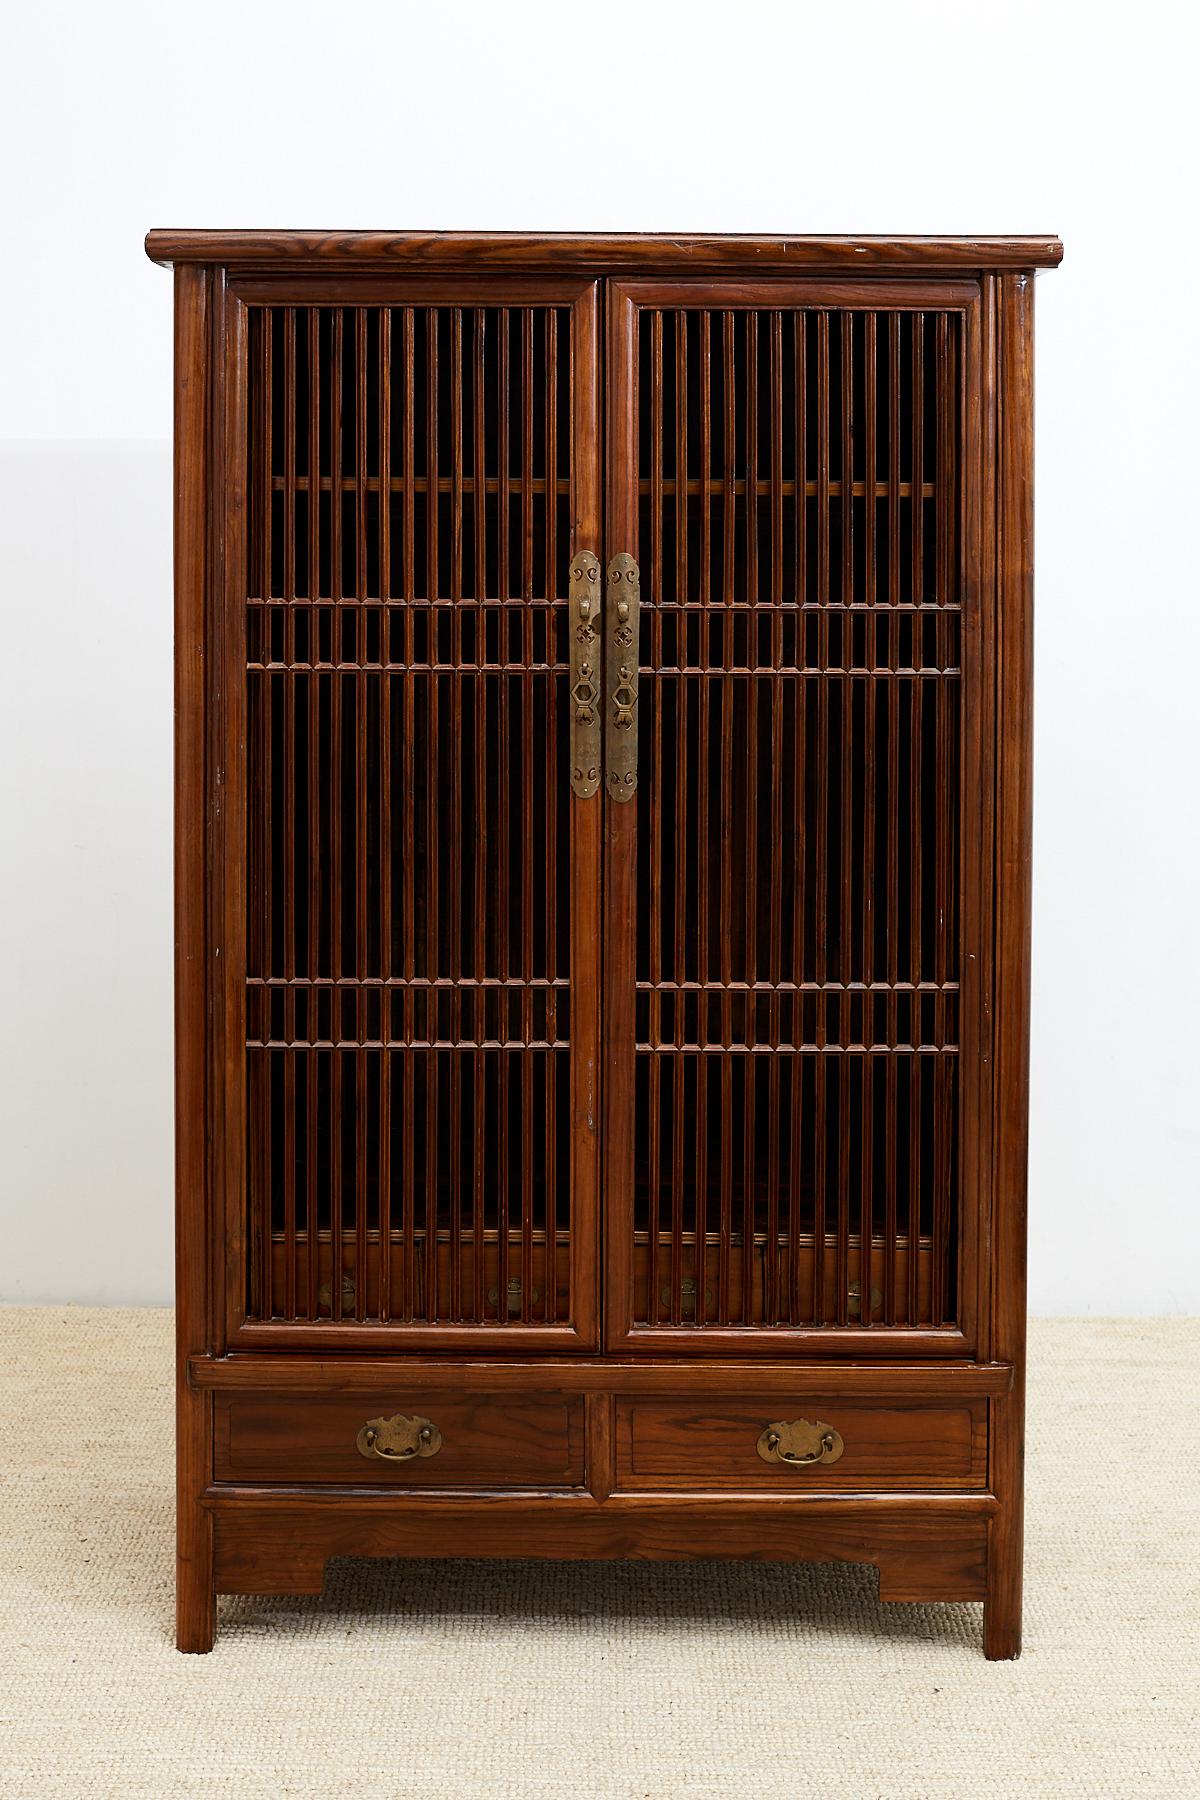 Distinctive Chinese kitchen cabinet featuring beautifully hand-carved lattice doors with a geometric design. Each front door opens and slides into the case where they are hidden from view. The inside has a large two shelf storage area and four small